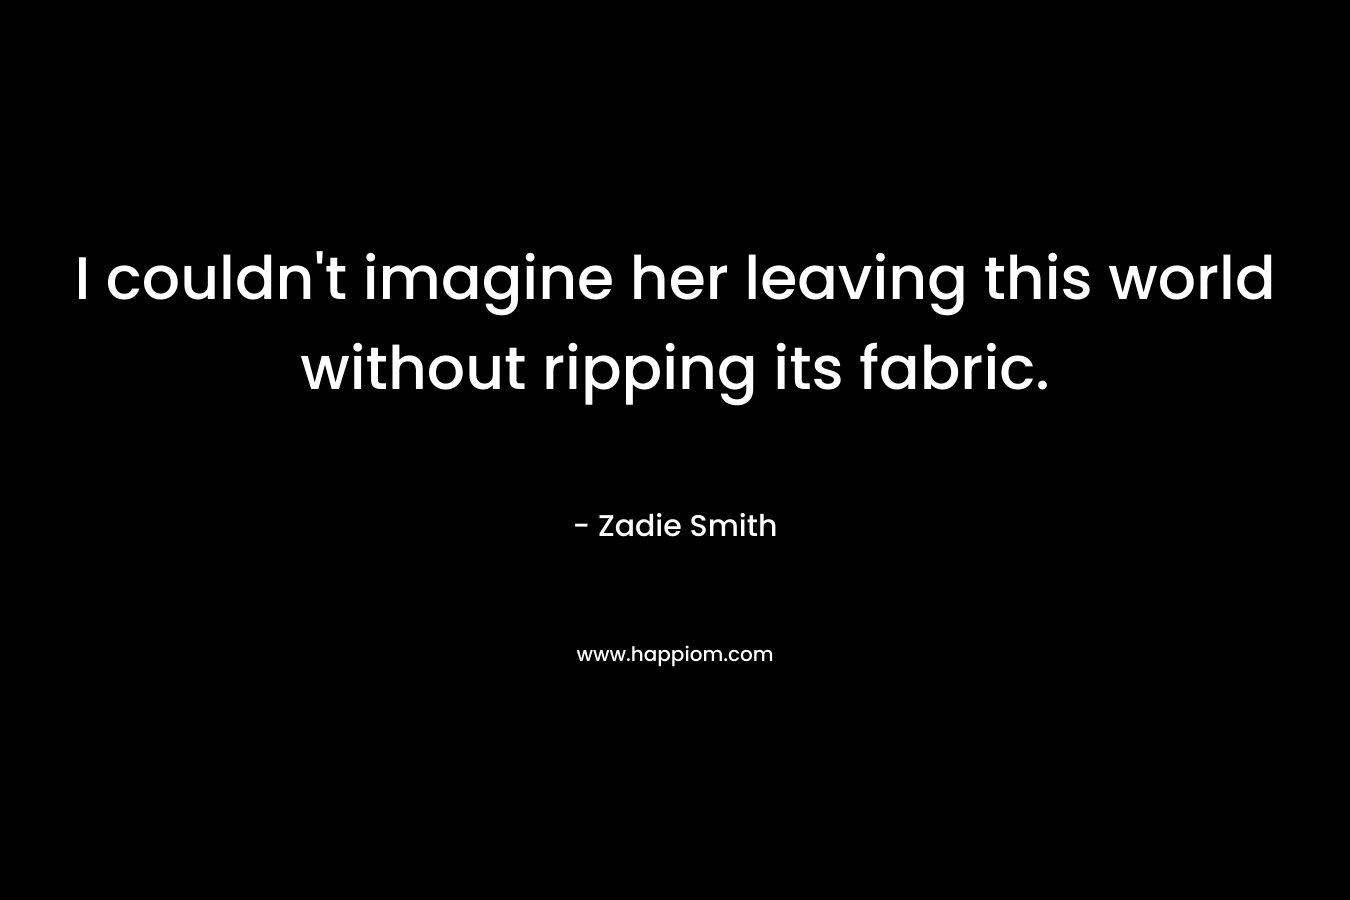 I couldn’t imagine her leaving this world without ripping its fabric. – Zadie Smith